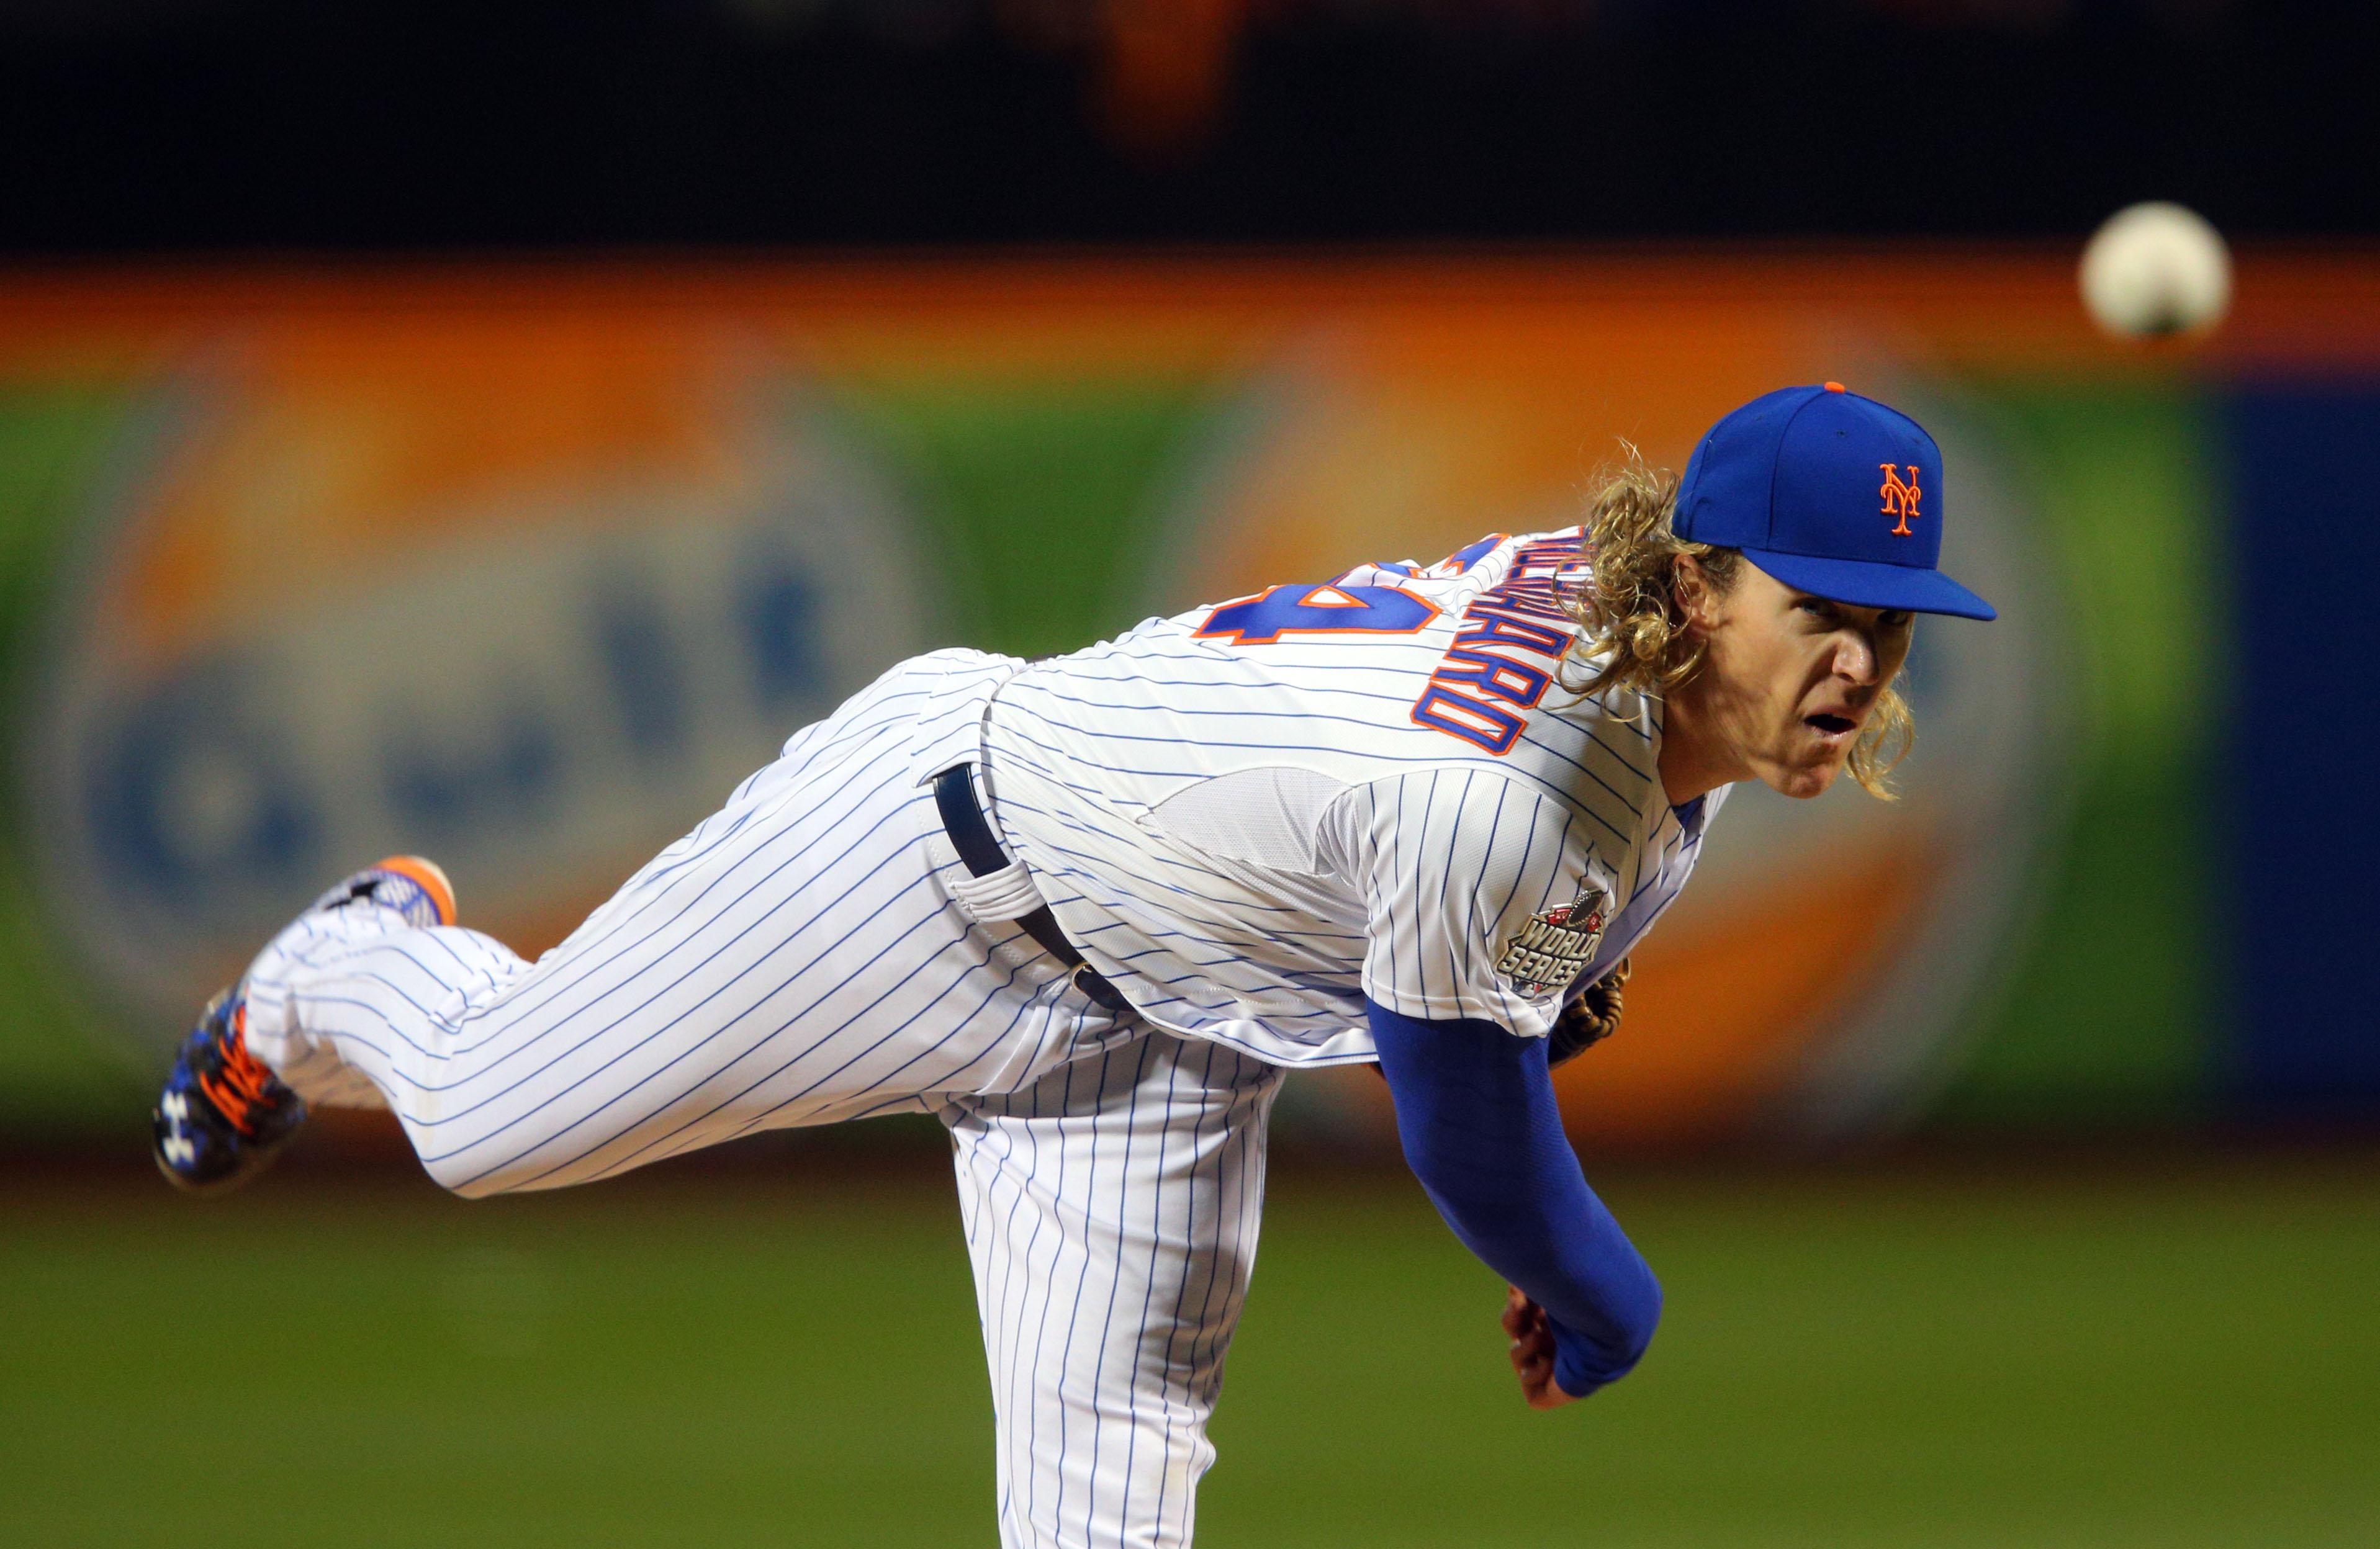 Oct 30, 2015; New York City, NY, USA; New York Mets starting pitcher Noah Syndergaard throws a pitch against the Kansas City Royals in the first inning in game three of the World Series at Citi Field. / Brad Penner-USA TODAY Sports